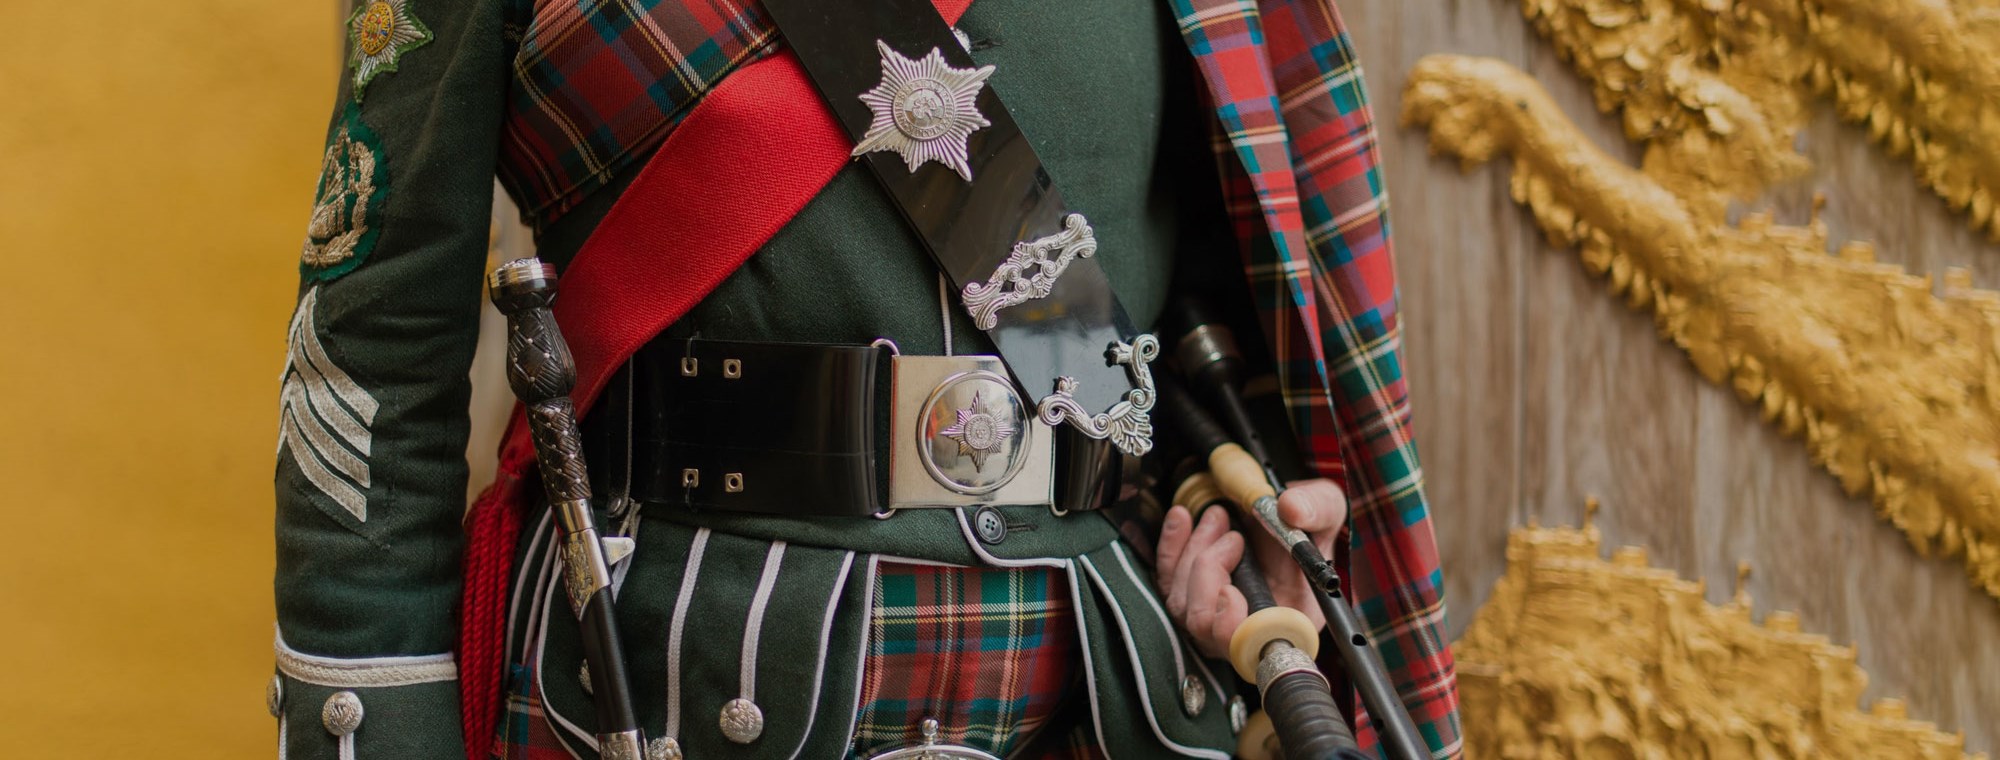 Meet a professional bagpiper on several of our Scotland tours